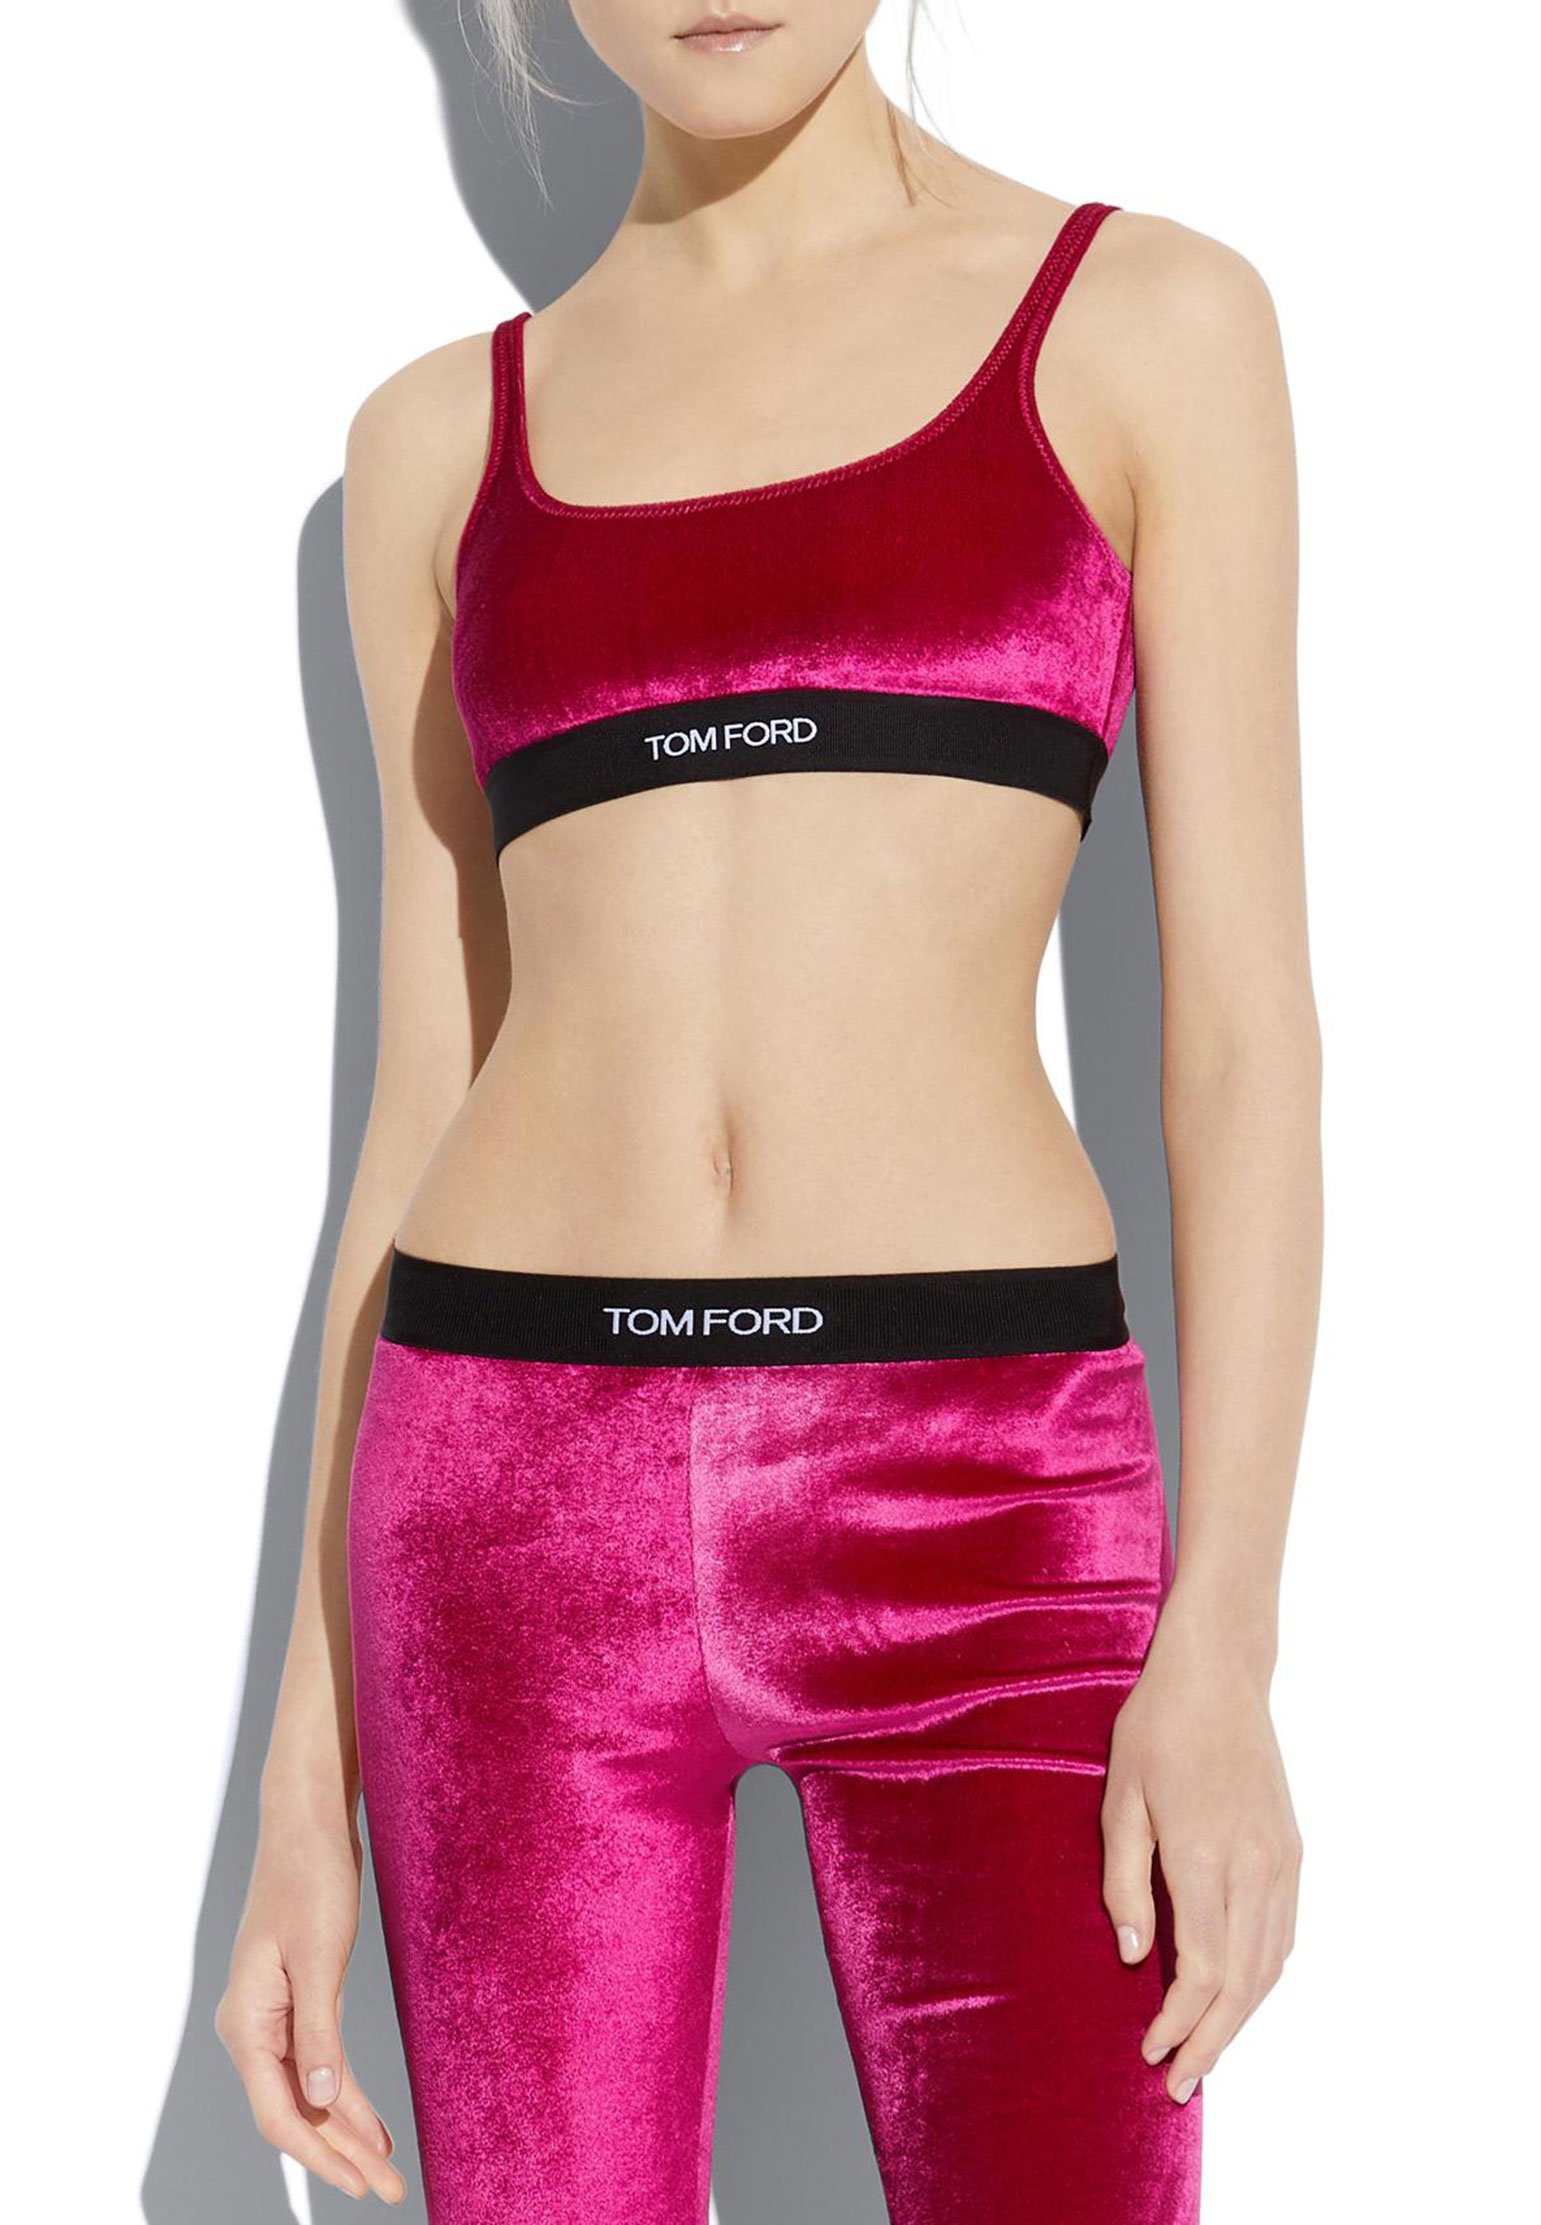 Top TOM FORD Color: pink (Code: 1067) in online store Allure